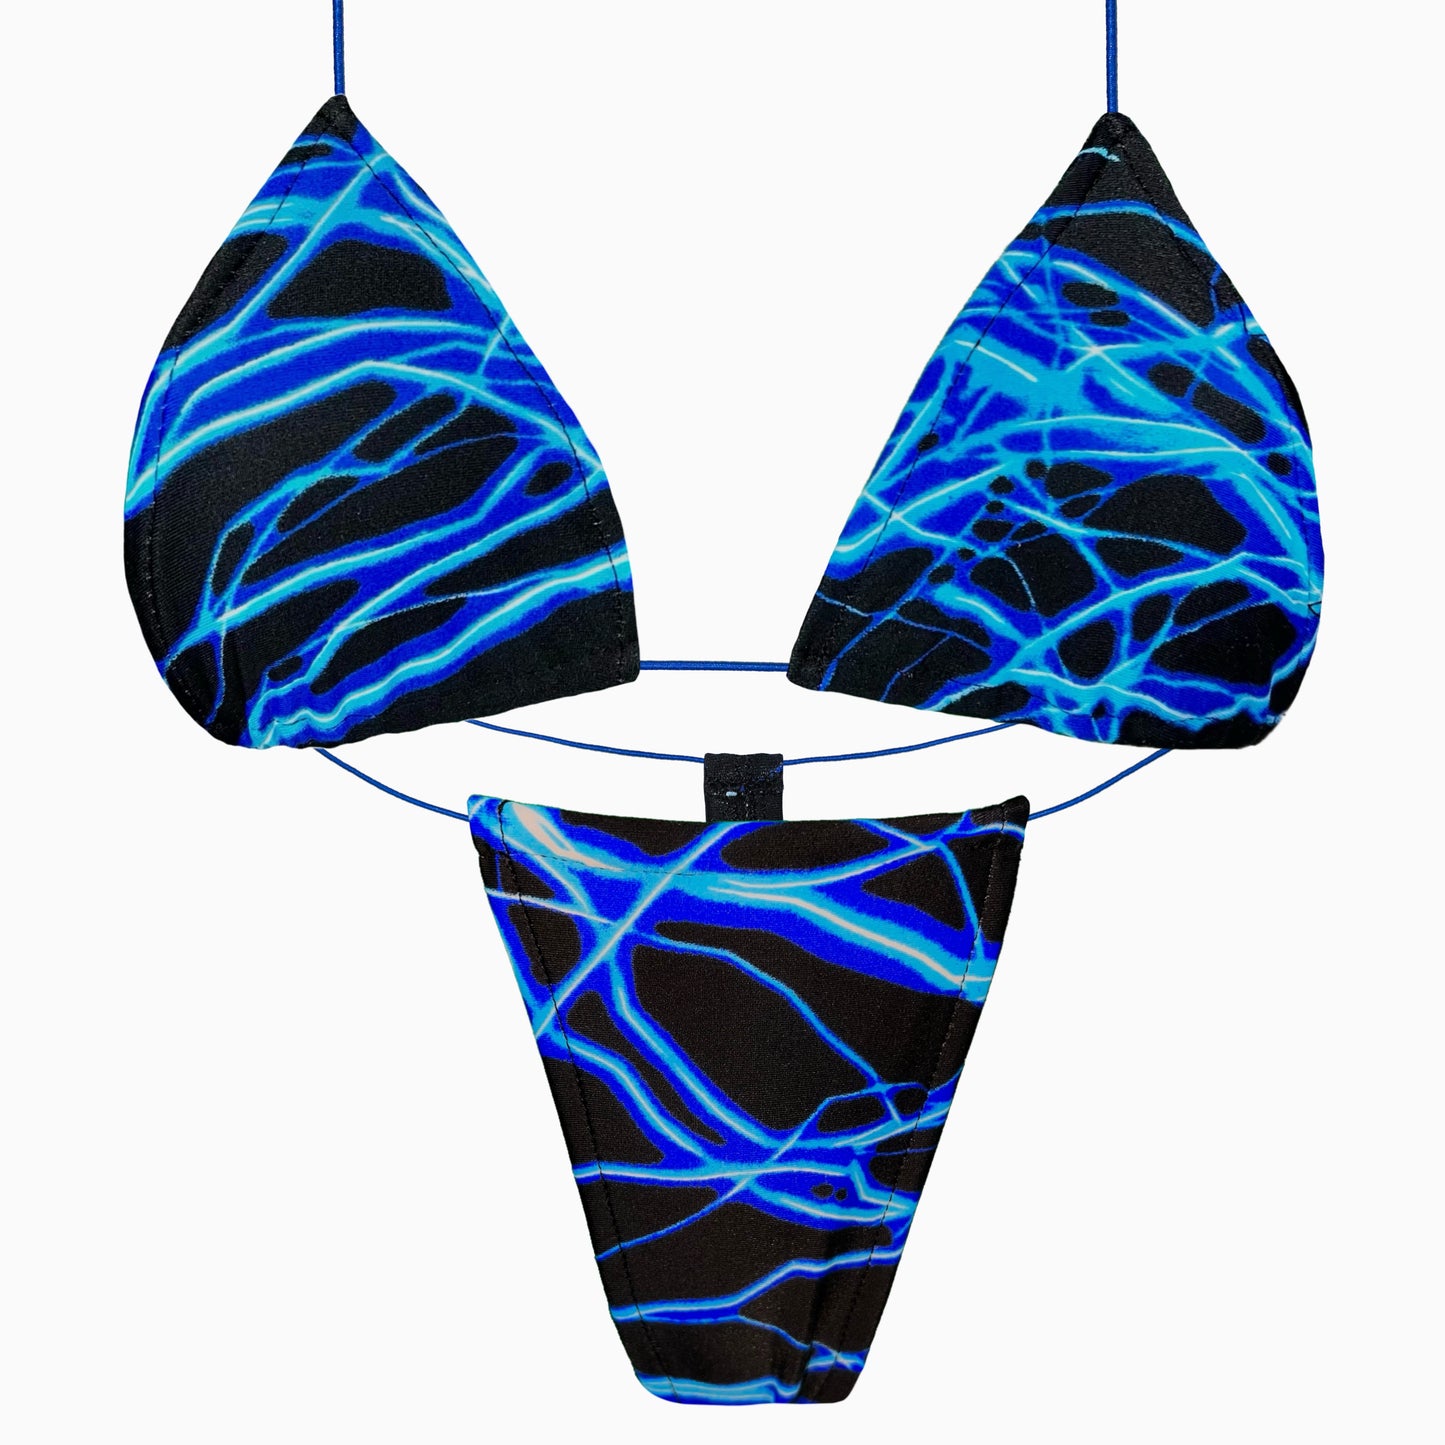 ACE Tieable Microkini: It's Electric Blue